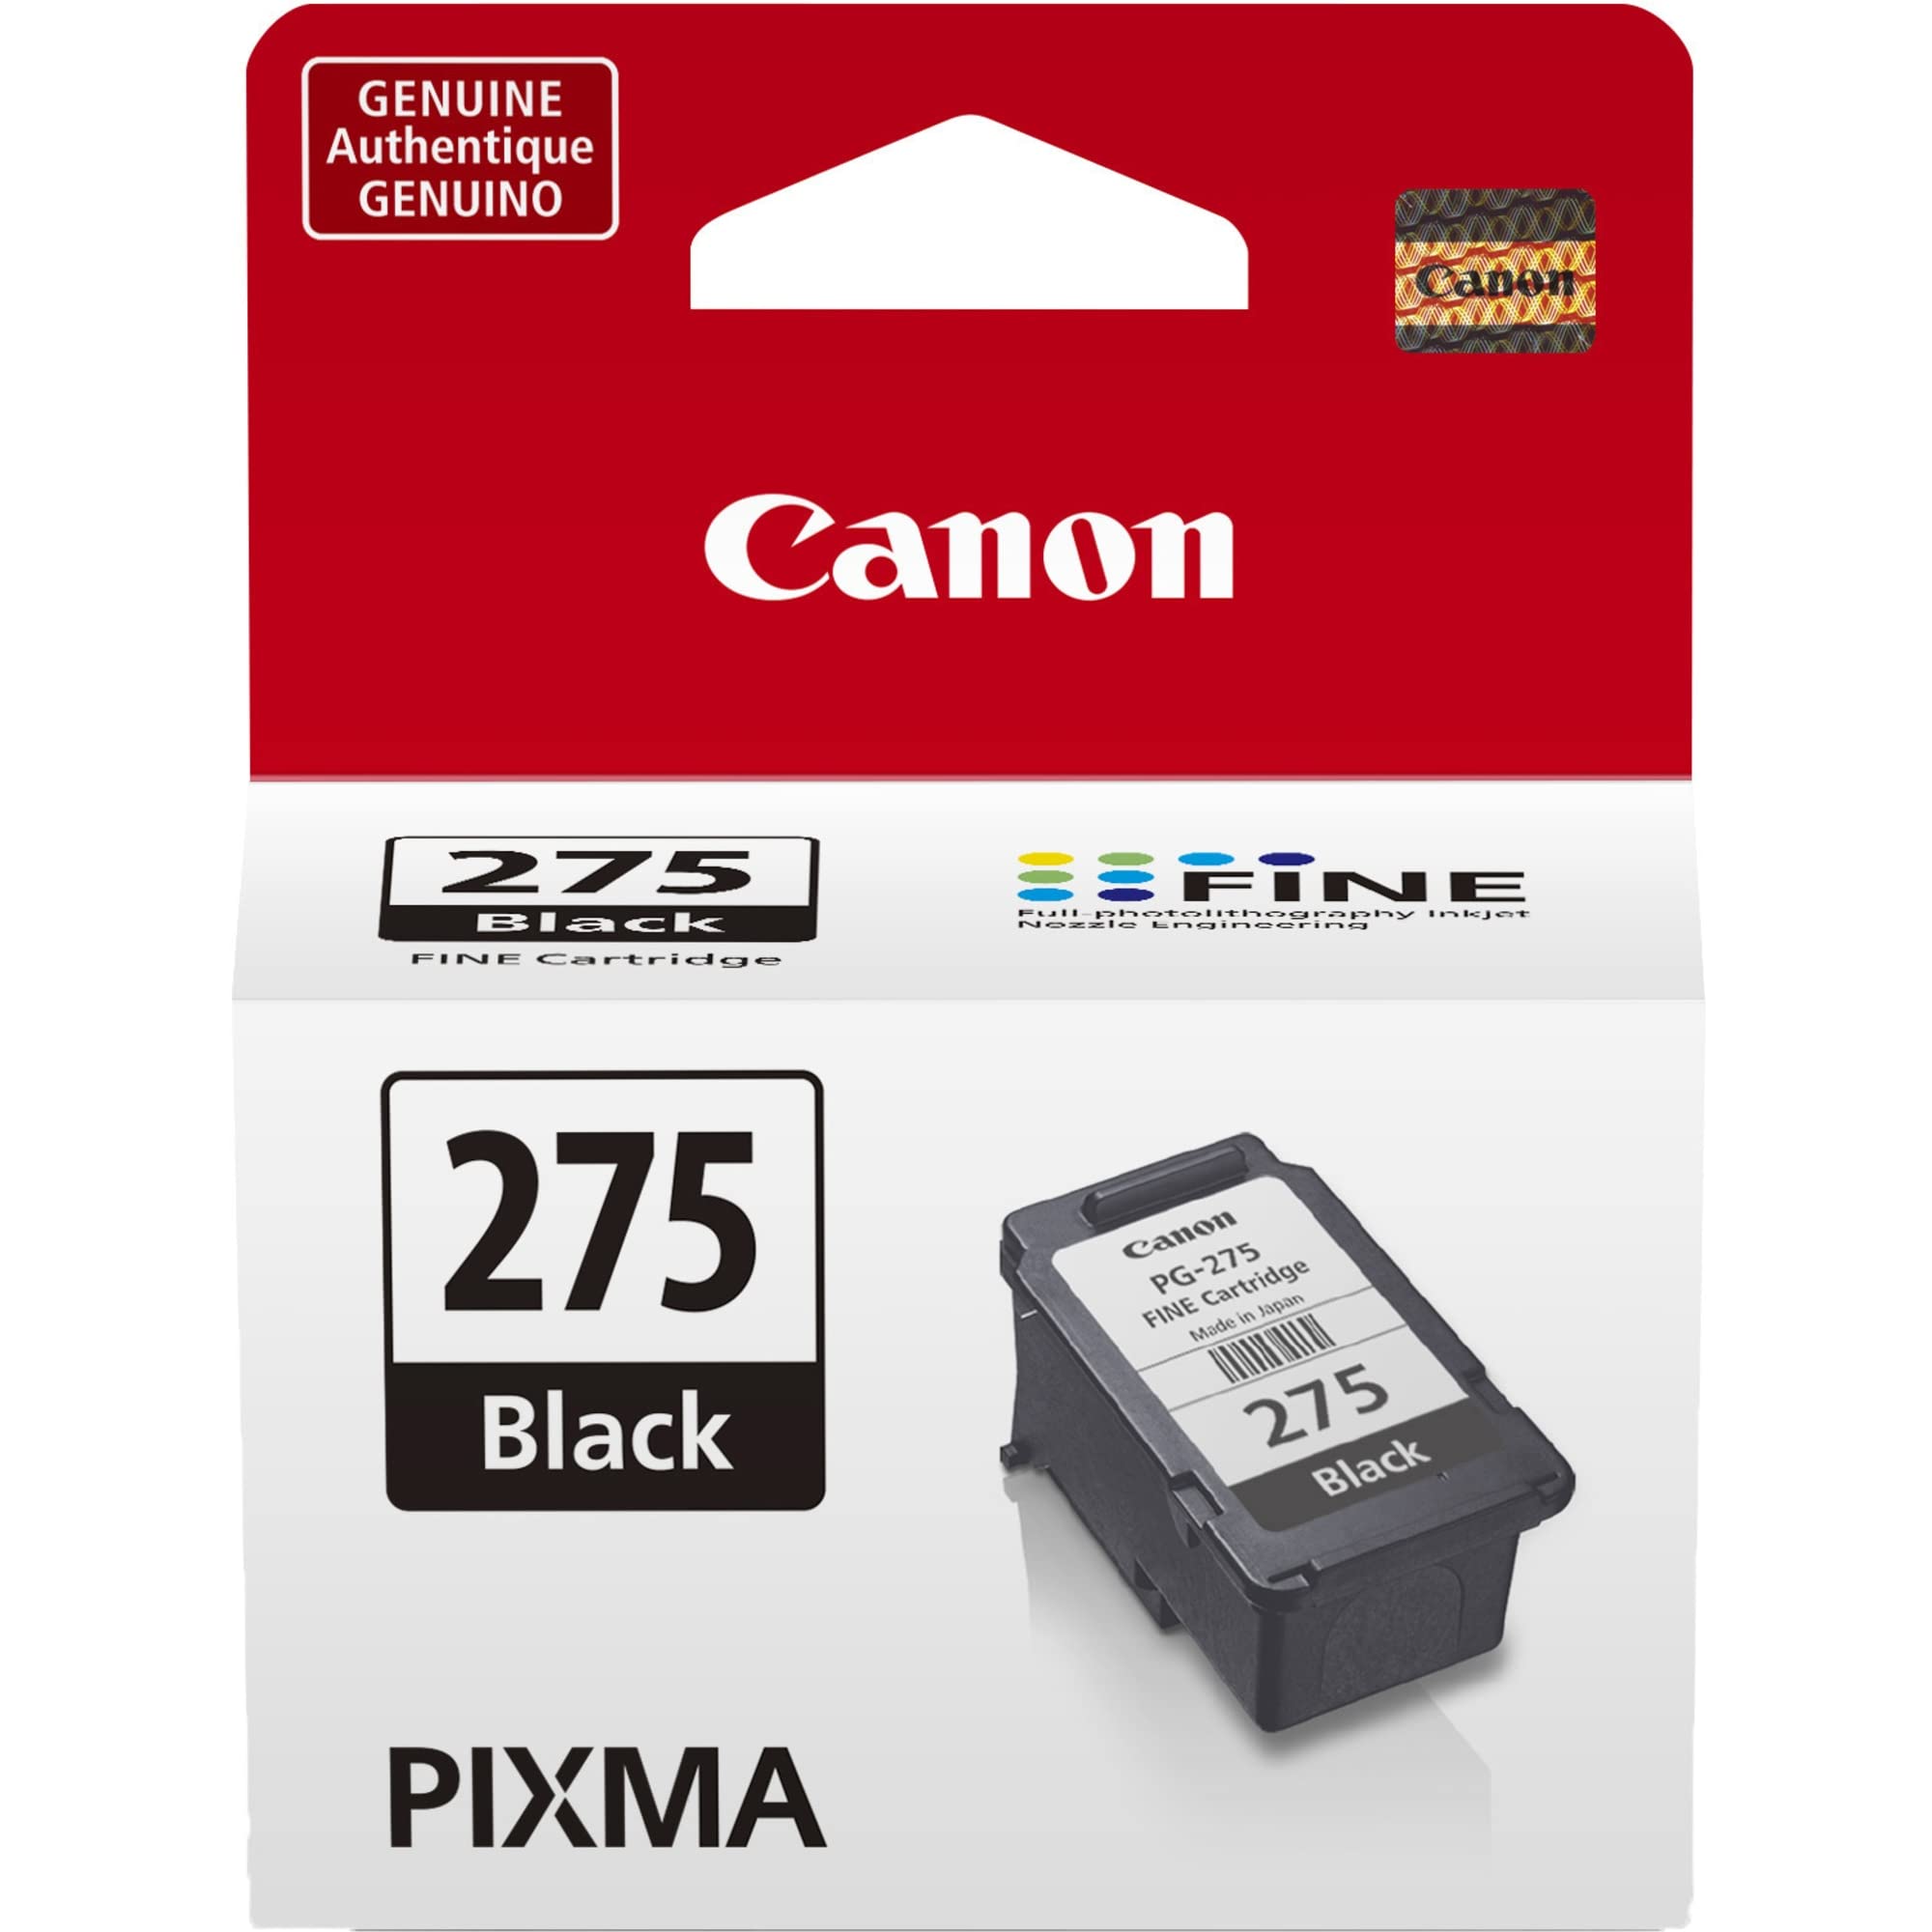 Canon PG-275 Black Ink Tank, Compatible to PIXMA TS3520, TS3522 and TR4720 Printers